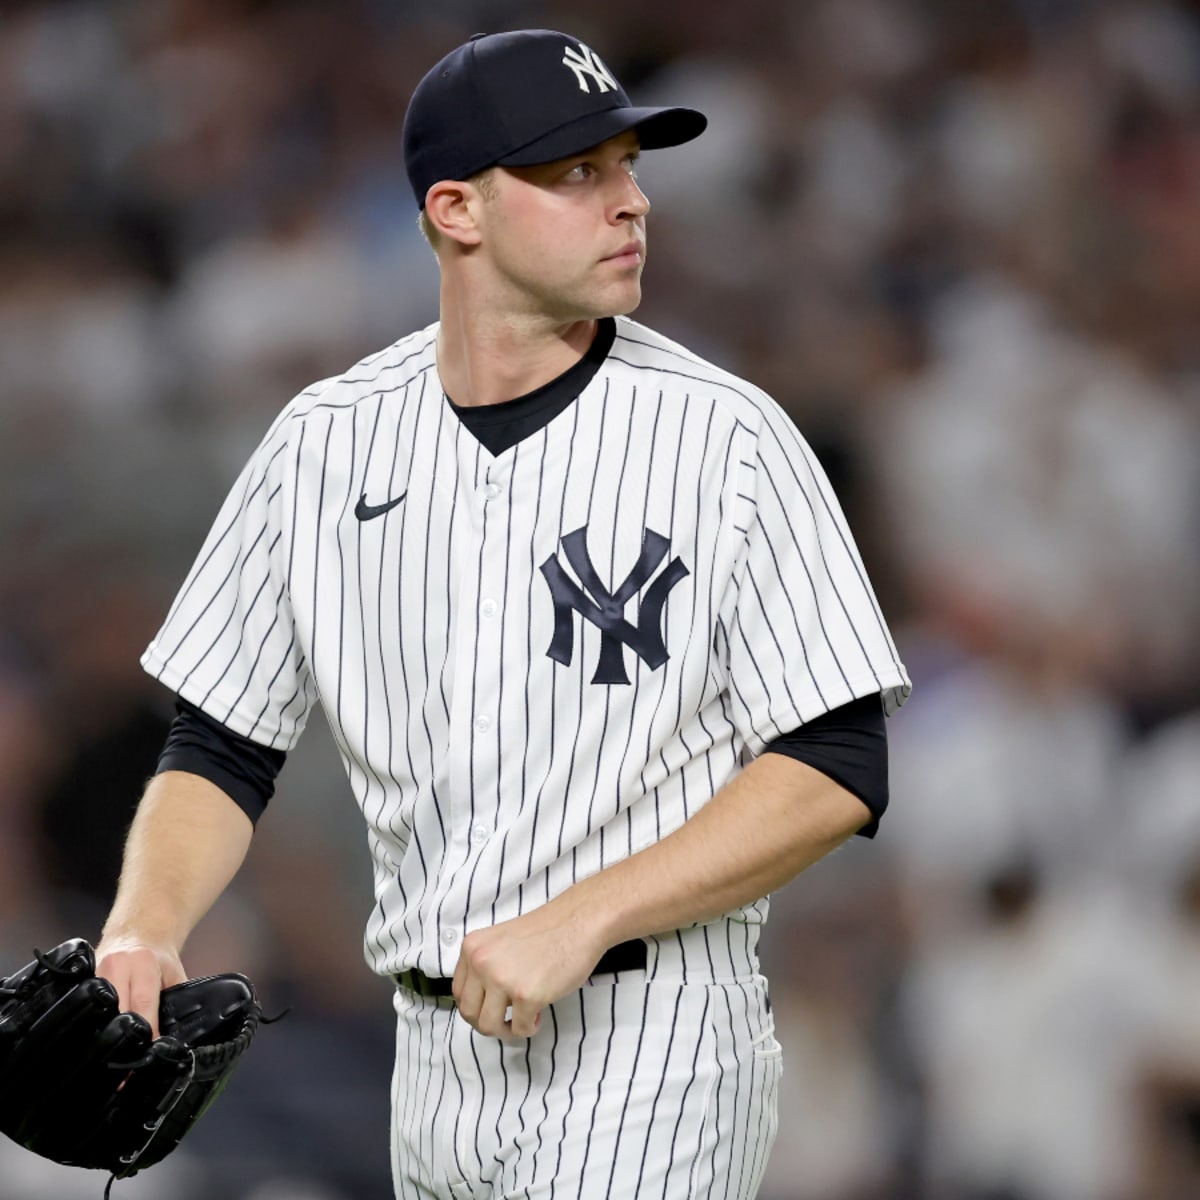 Yankees reliever Michael King out for the season with injury